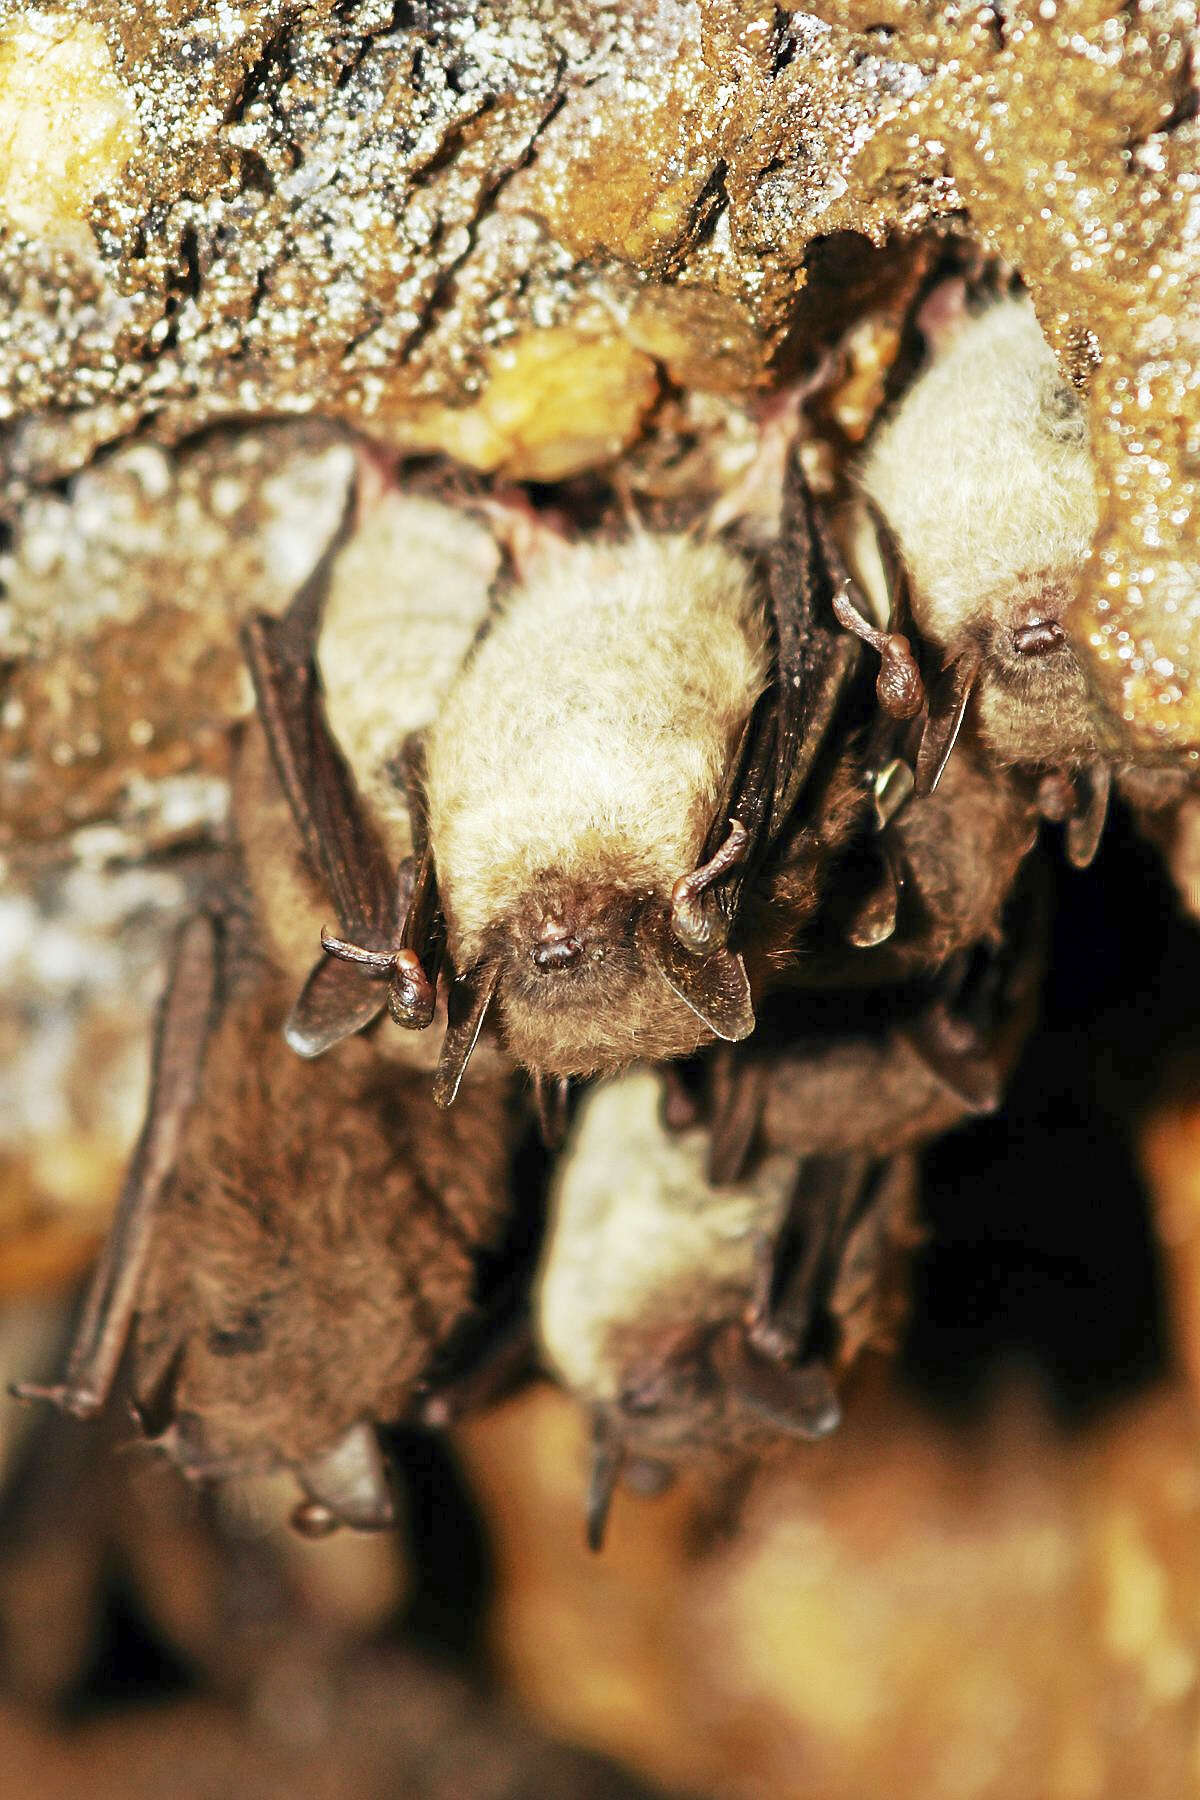 Several species of bats that call Connecticut home have been devastated by white-nose syndrome, so much so that in 2015 three species were listed as endangered on Connecticut’s List of Endangered, Threatened and Special Concern Species. These species are the little brown bat (pictured), northern long-eared bat (also federally threatened), and the tri-colored bat. The eastern small-footed bat was also up-listed from special concern to endangered.